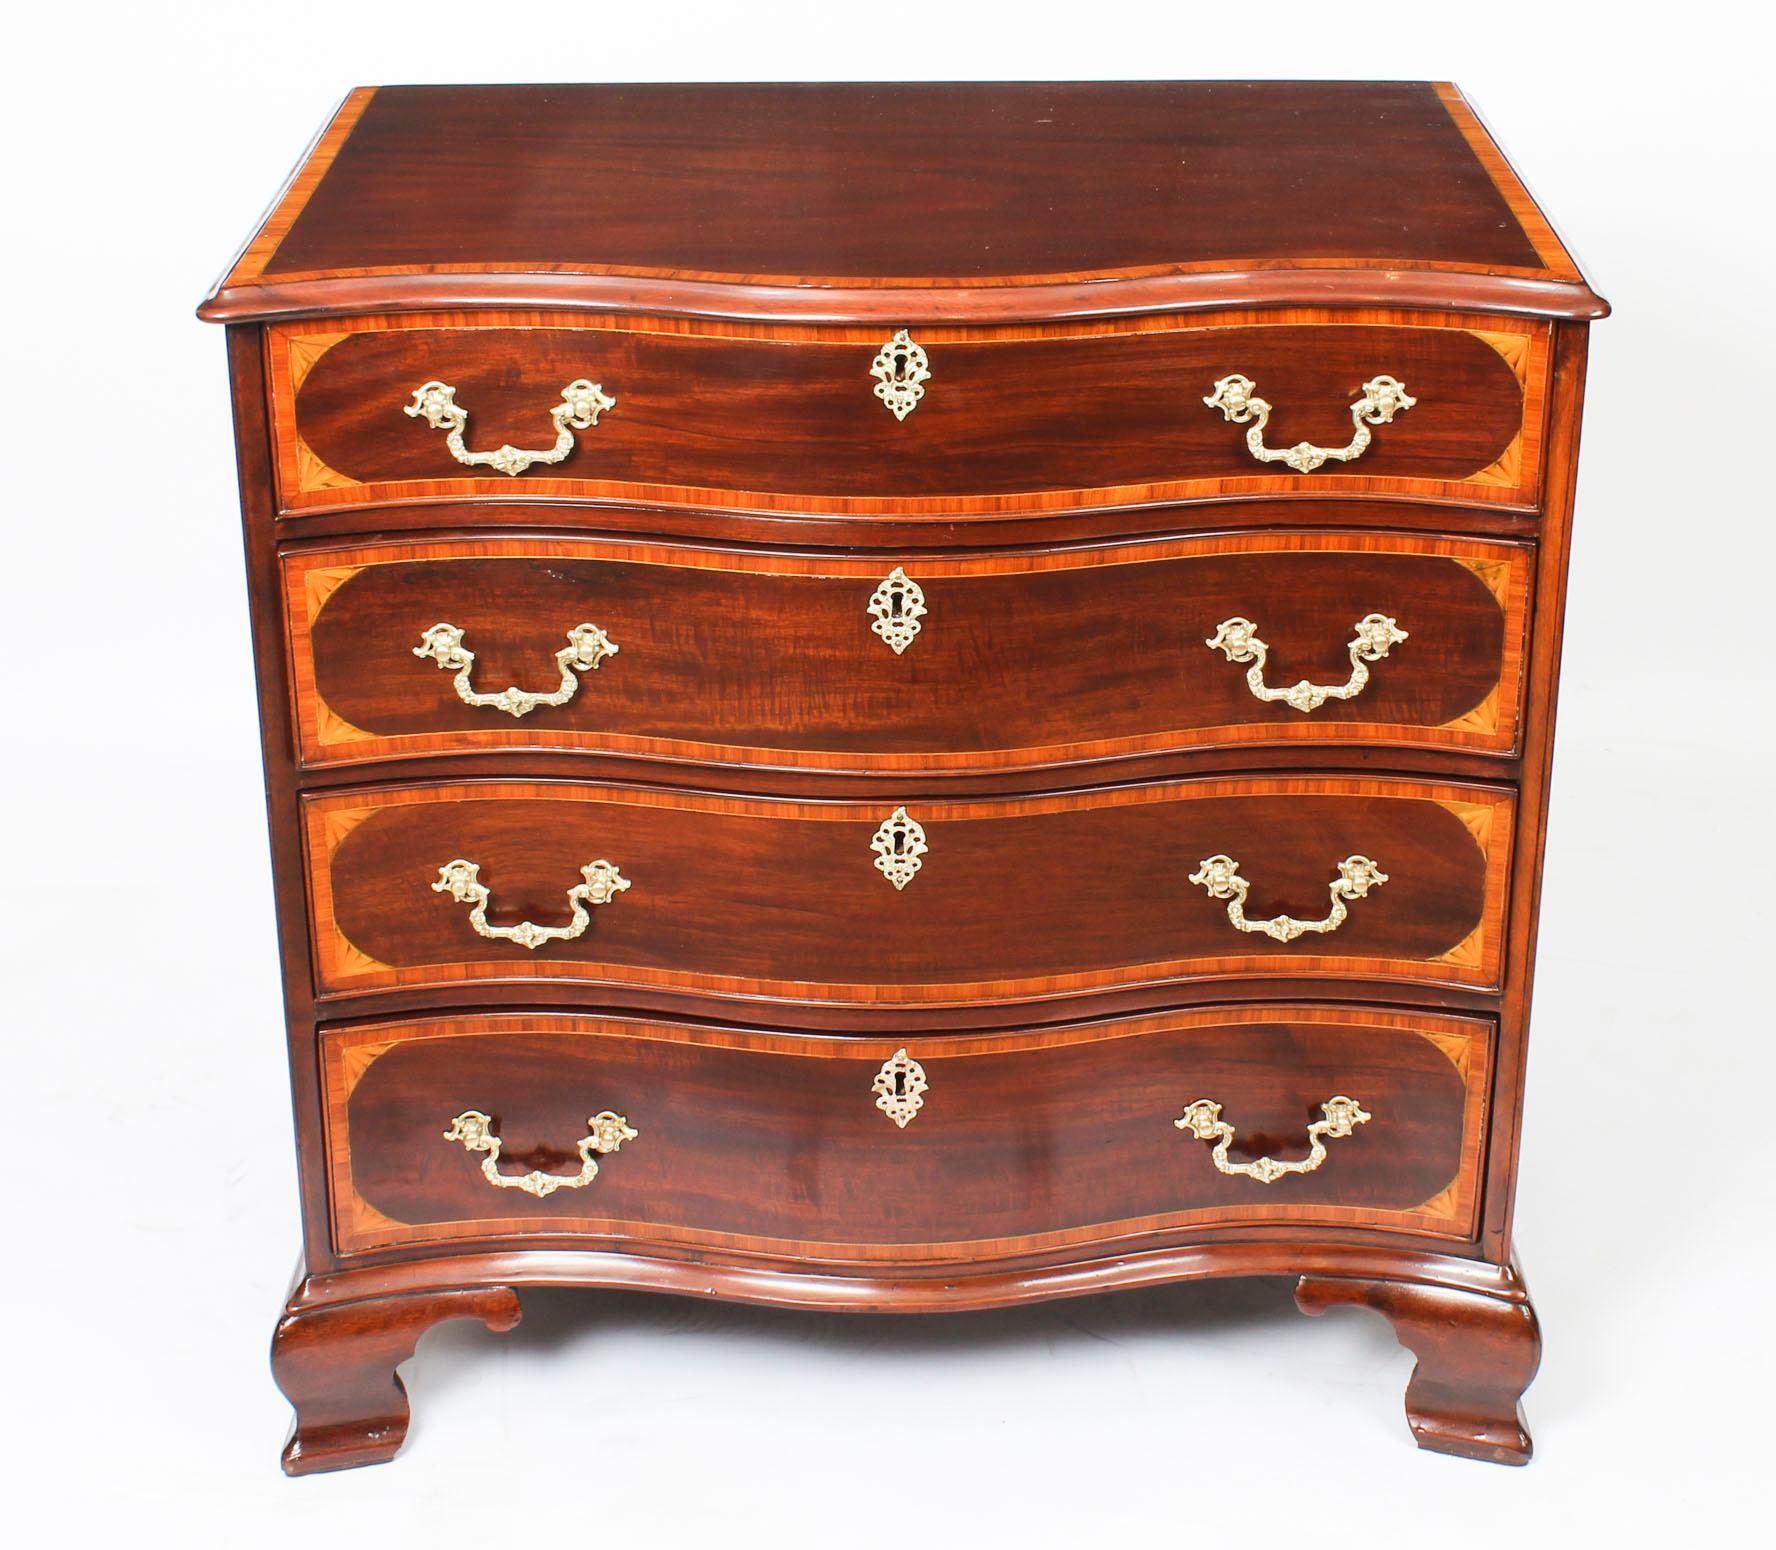 This is beautifully crafted antique George III flame mahogany serpentine fronted chest of drawers, circa 1780 in date.
 
The curvaceous serpentine chest features decorative satinwood and tulipwood banding and boxwood stringing, and is made from the